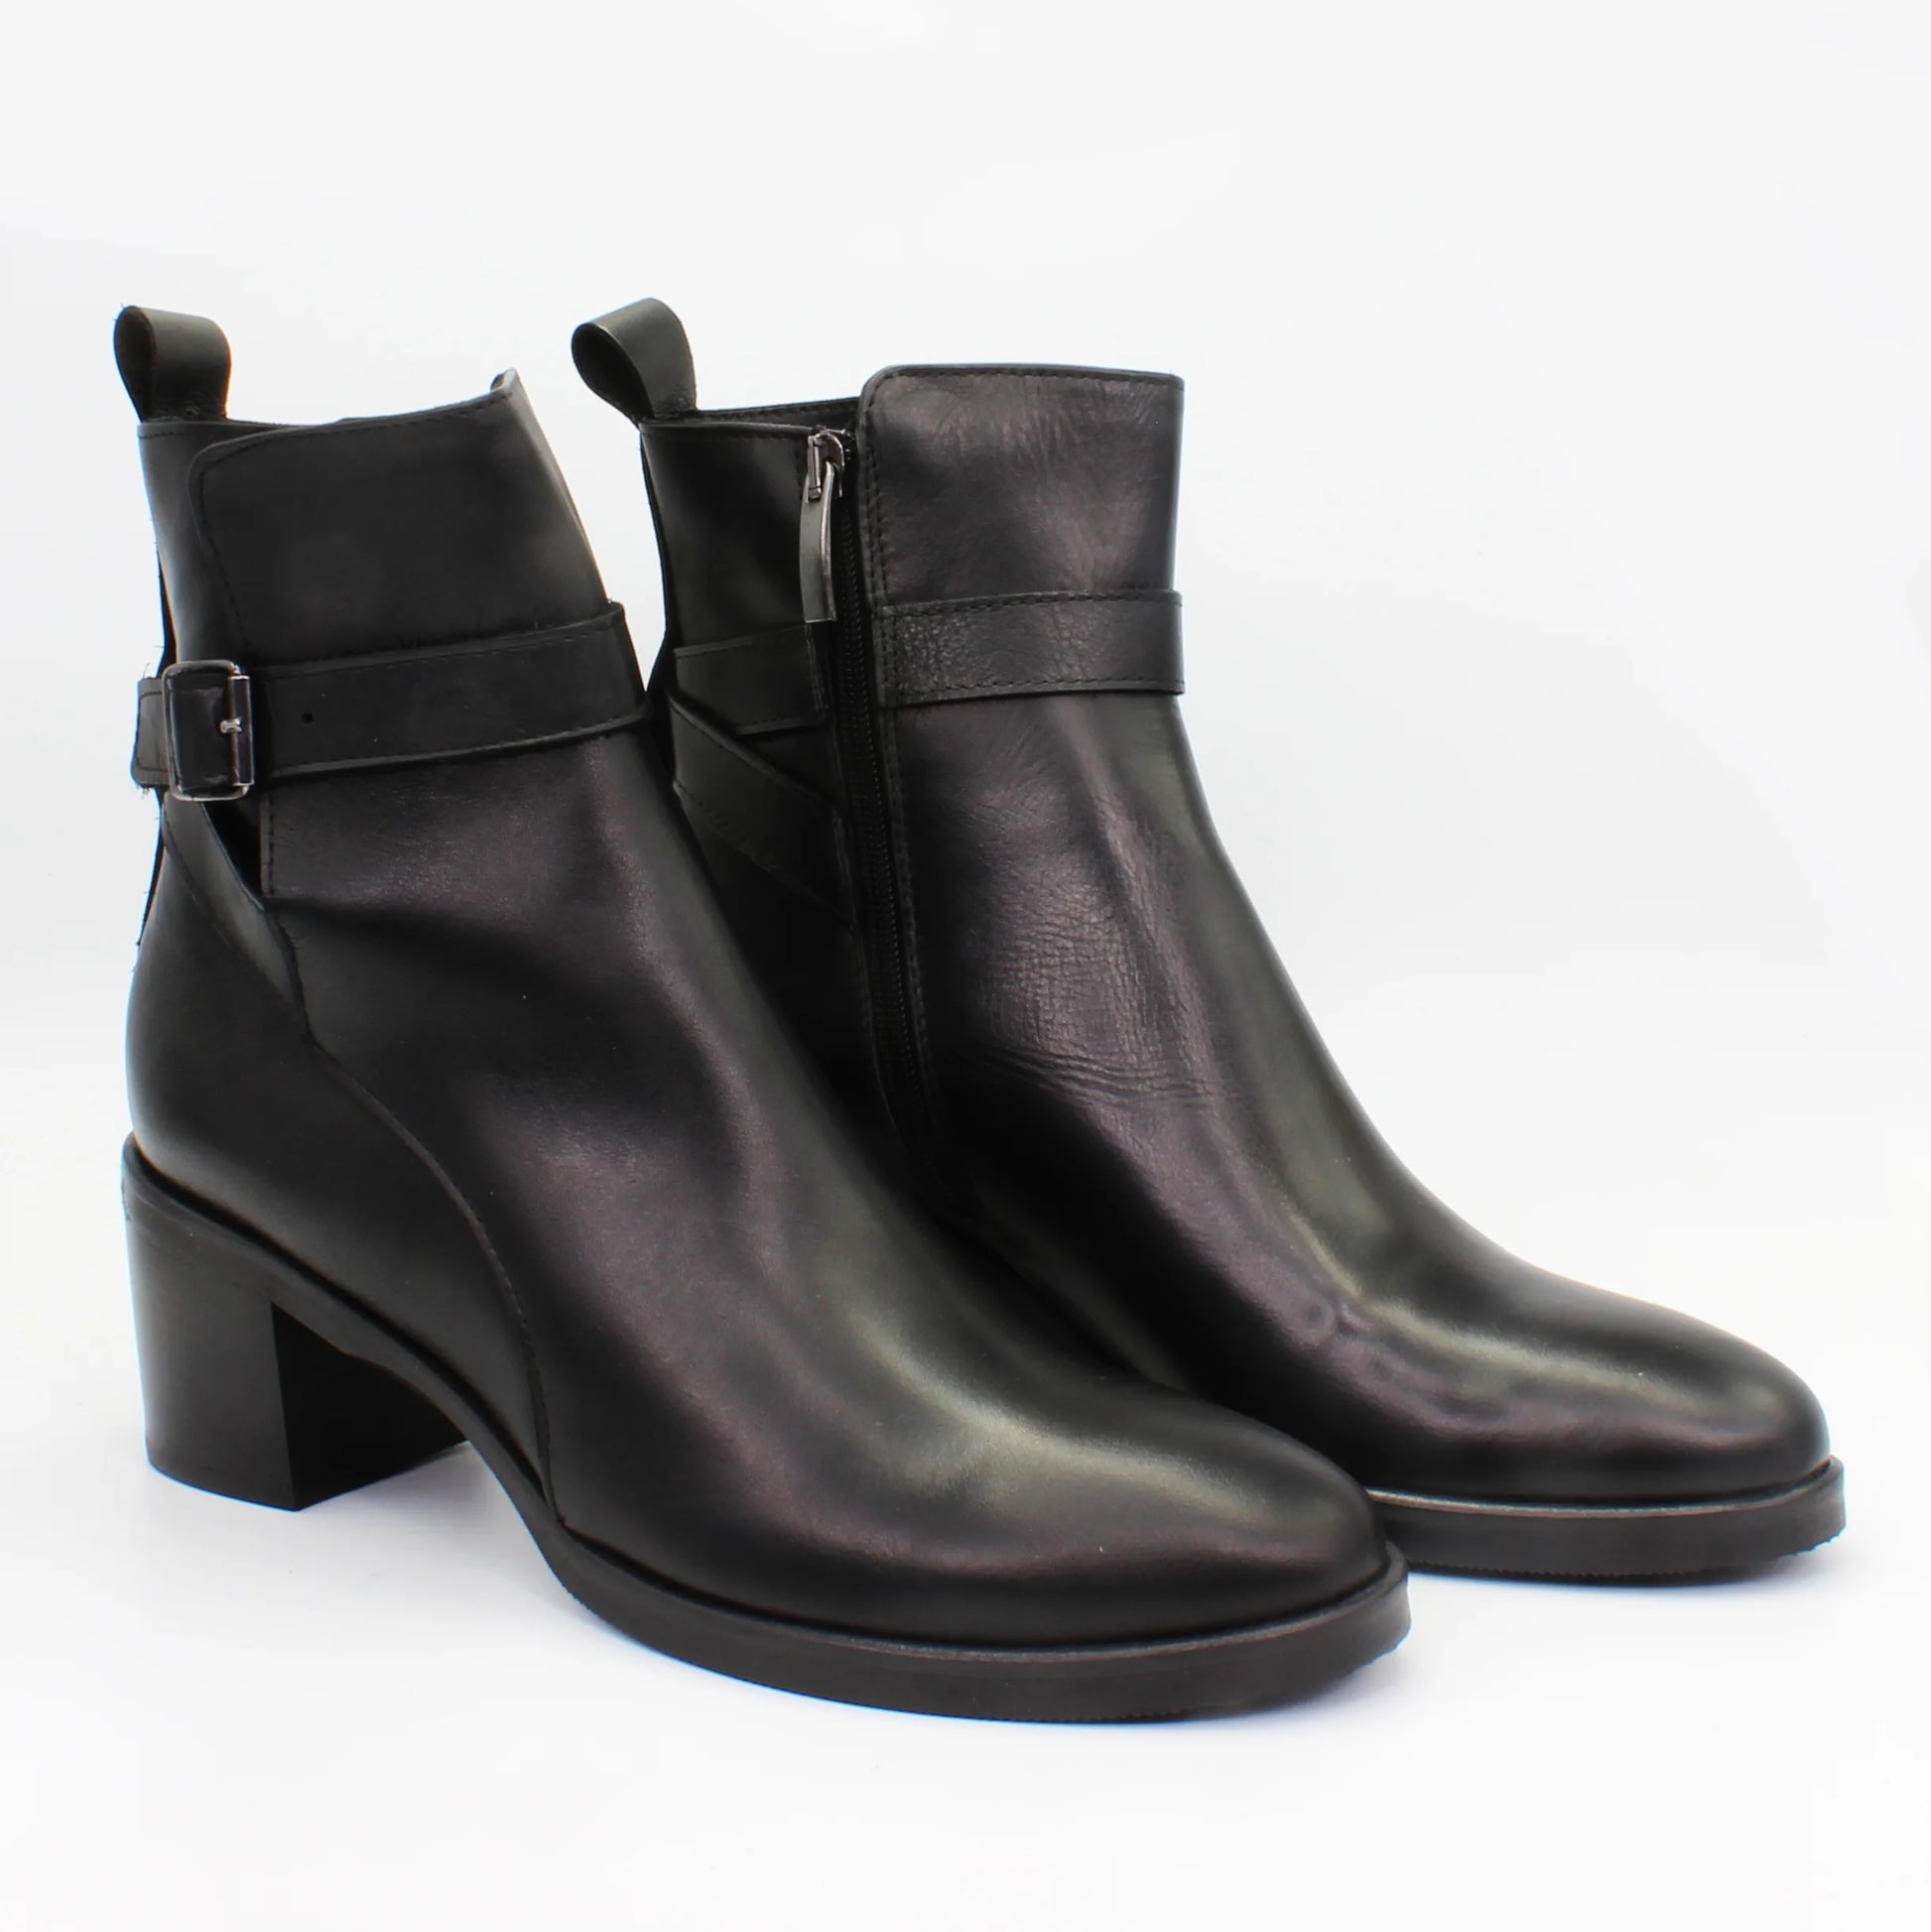 Shop Handmade Italian Leather Heeled Ankle Boot in Nero (GC2560)  or browse our range of hand-made Italian boots for women in leather or suede in-store at Aliverti Cape Town, or shop online. We deliver in South Africa & offer multiple payment plans as well as accept multiple safe & secure payment methods.